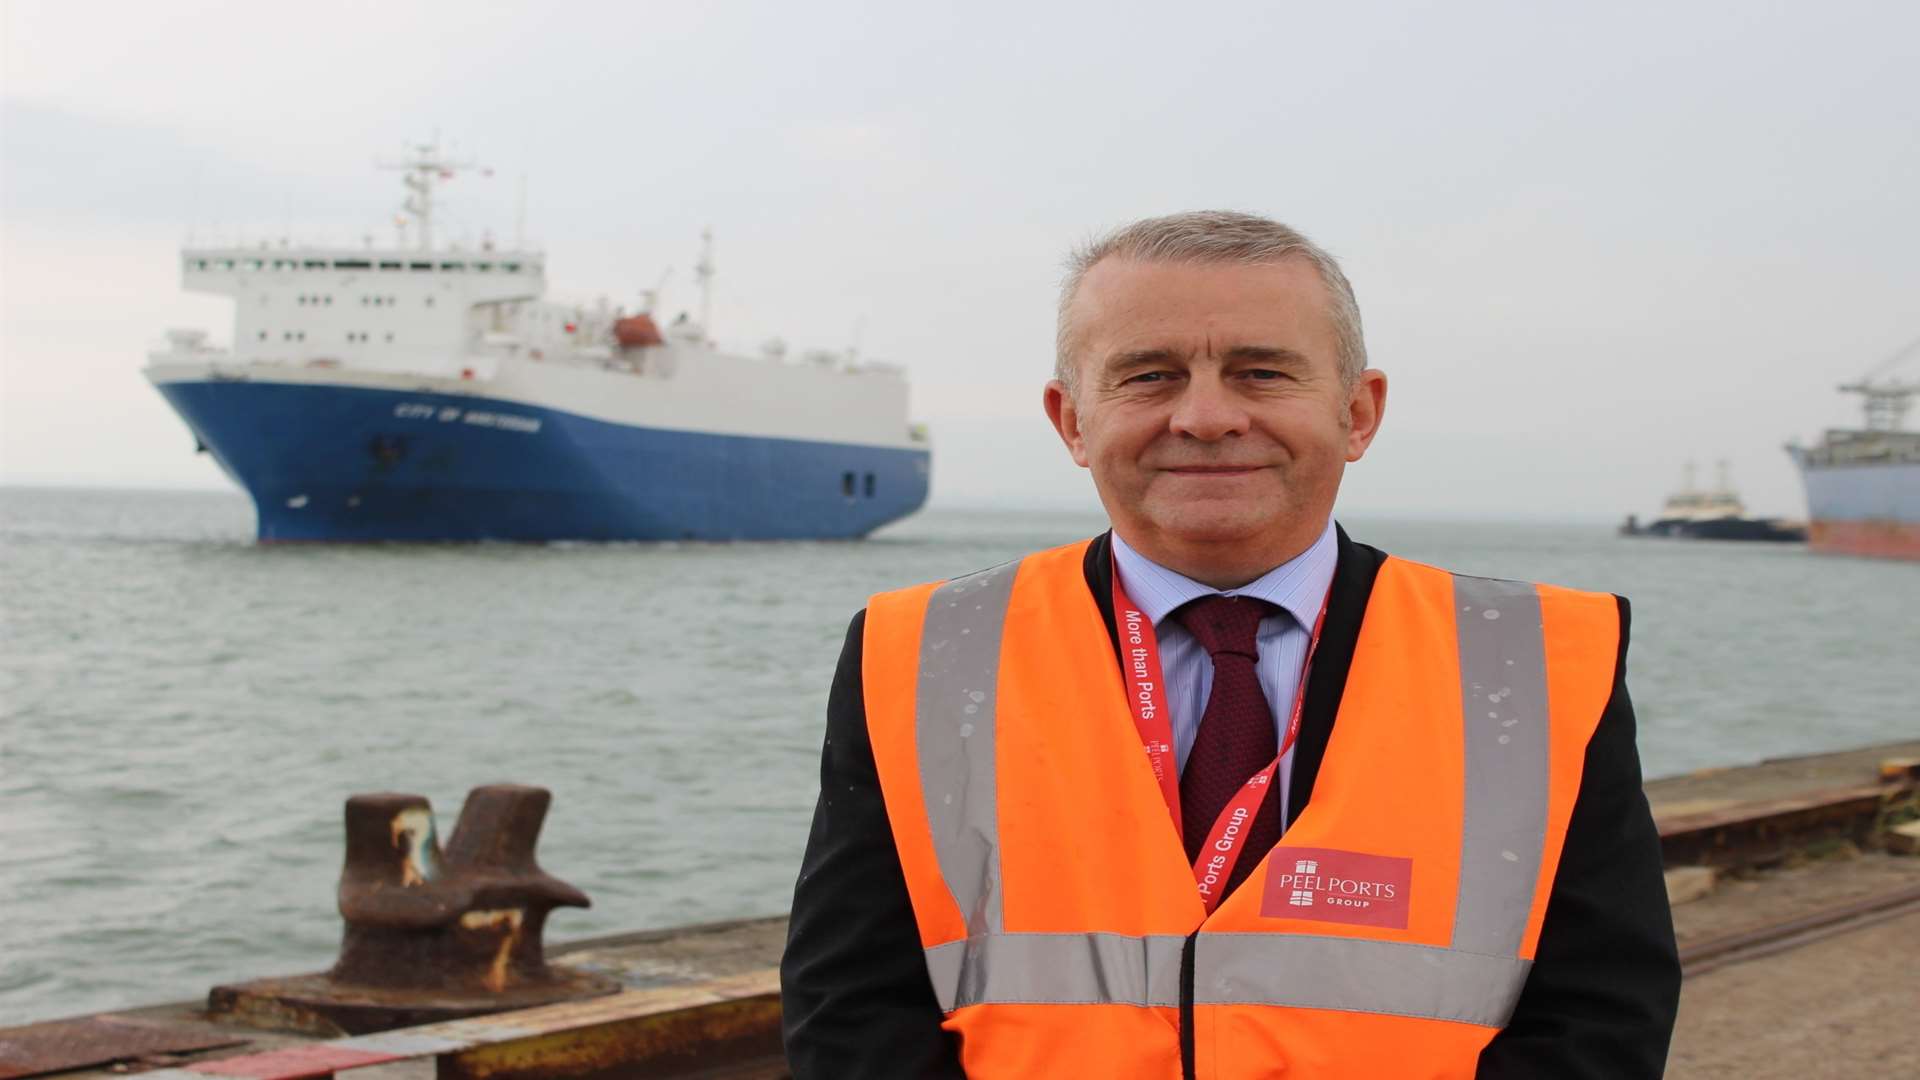 Paul Barker, Peel Ports' port director for Sheerness and Medway, on the dockside at Sheerness.